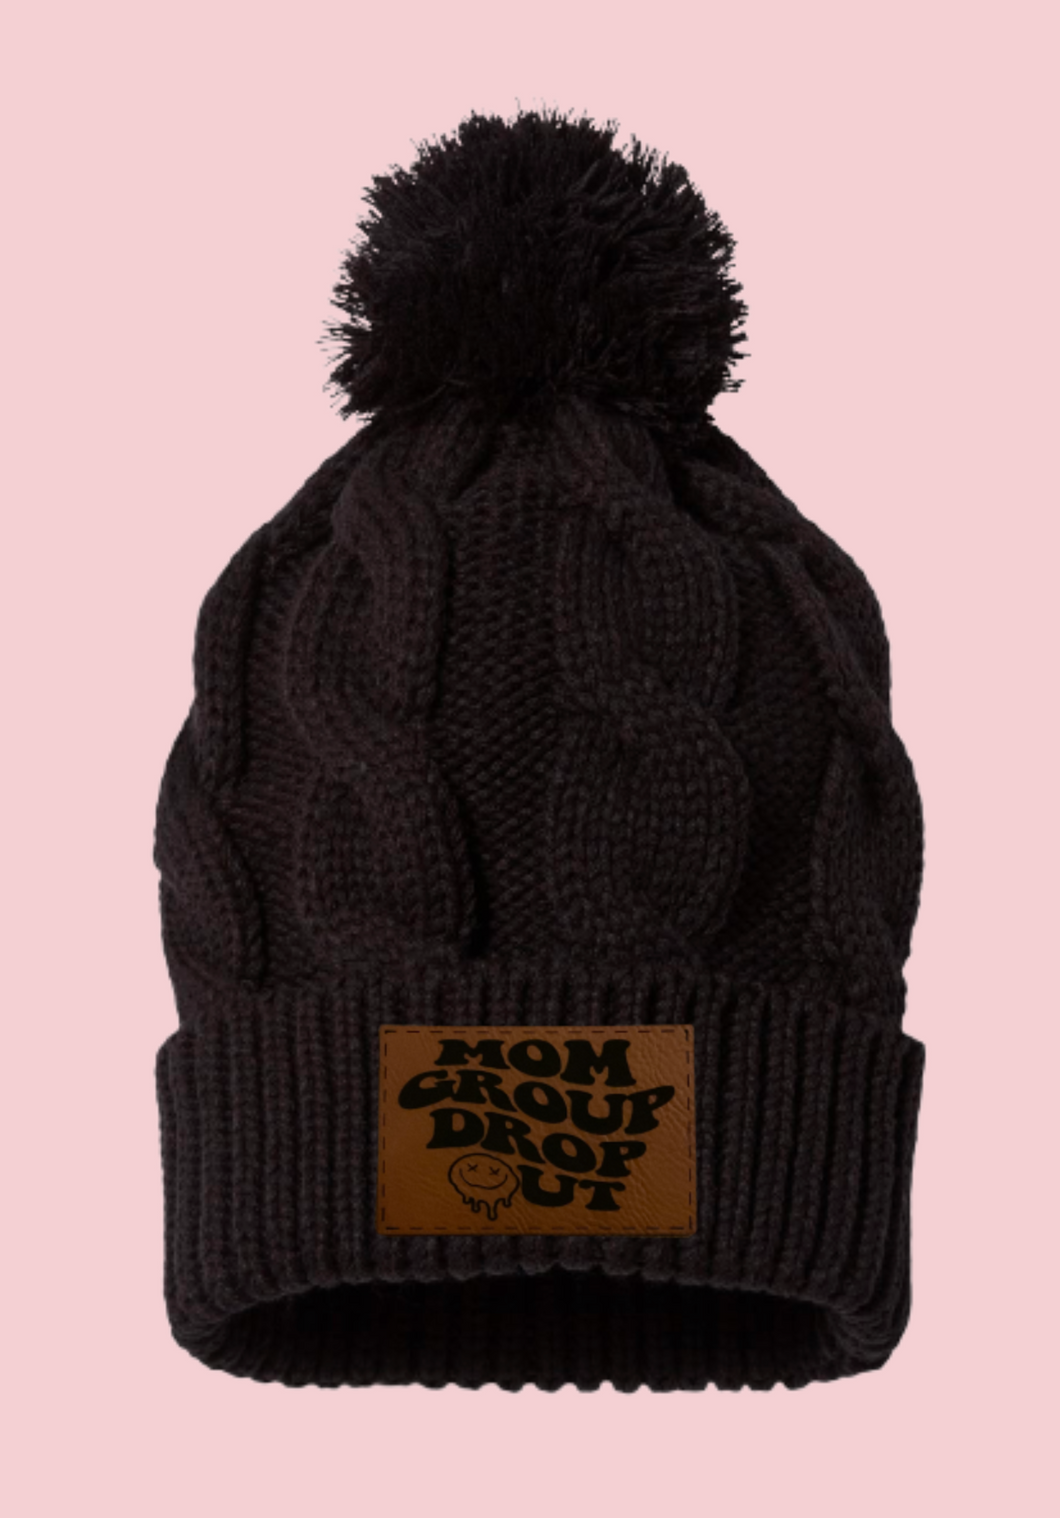 Mom group drop out hat/beanie